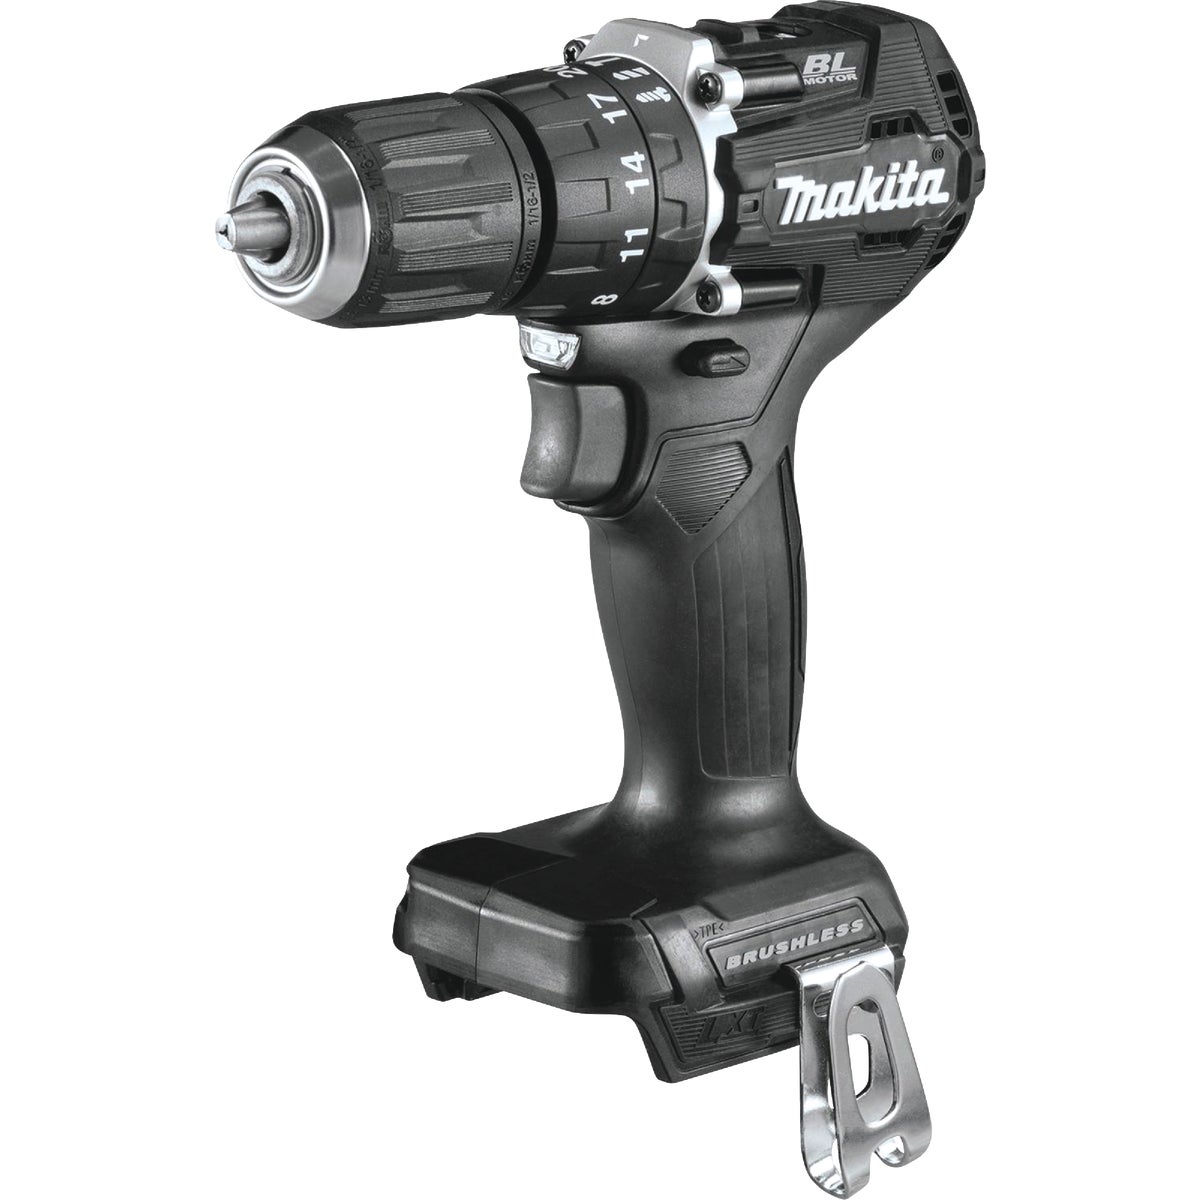 Makita 18-Volt LXT Lithium-Ion 1/2 In. Brushless Sub-Compact Cordless Hammer Drill (Tool Only)